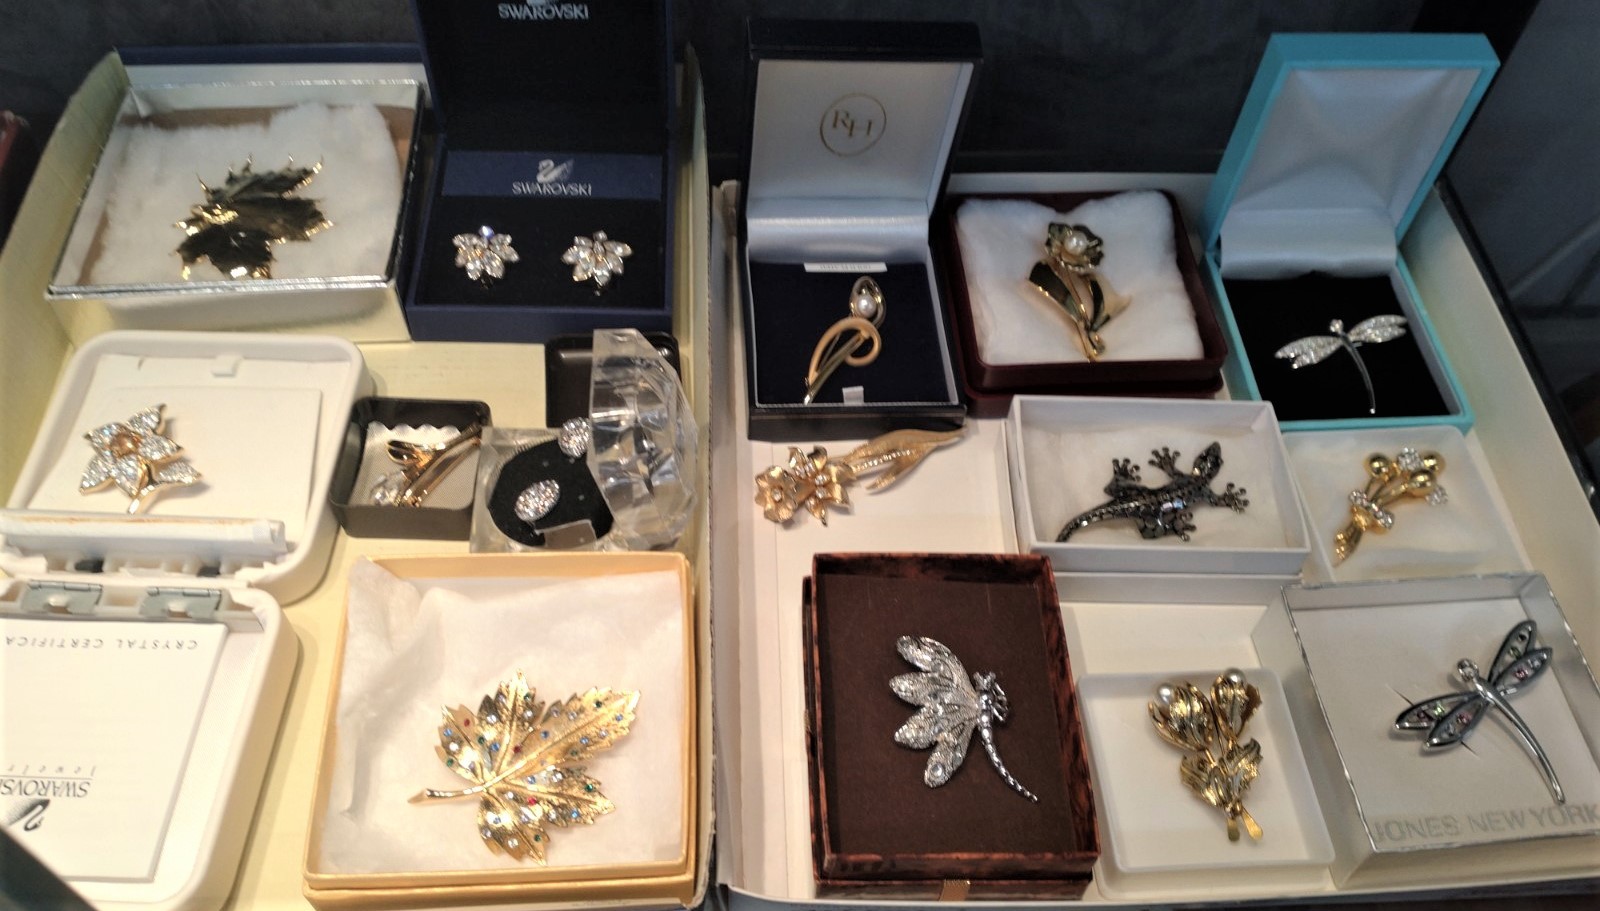 Costume jewellery brooches including Lizard, Dragonflies and floral subjects (16) (two trays)